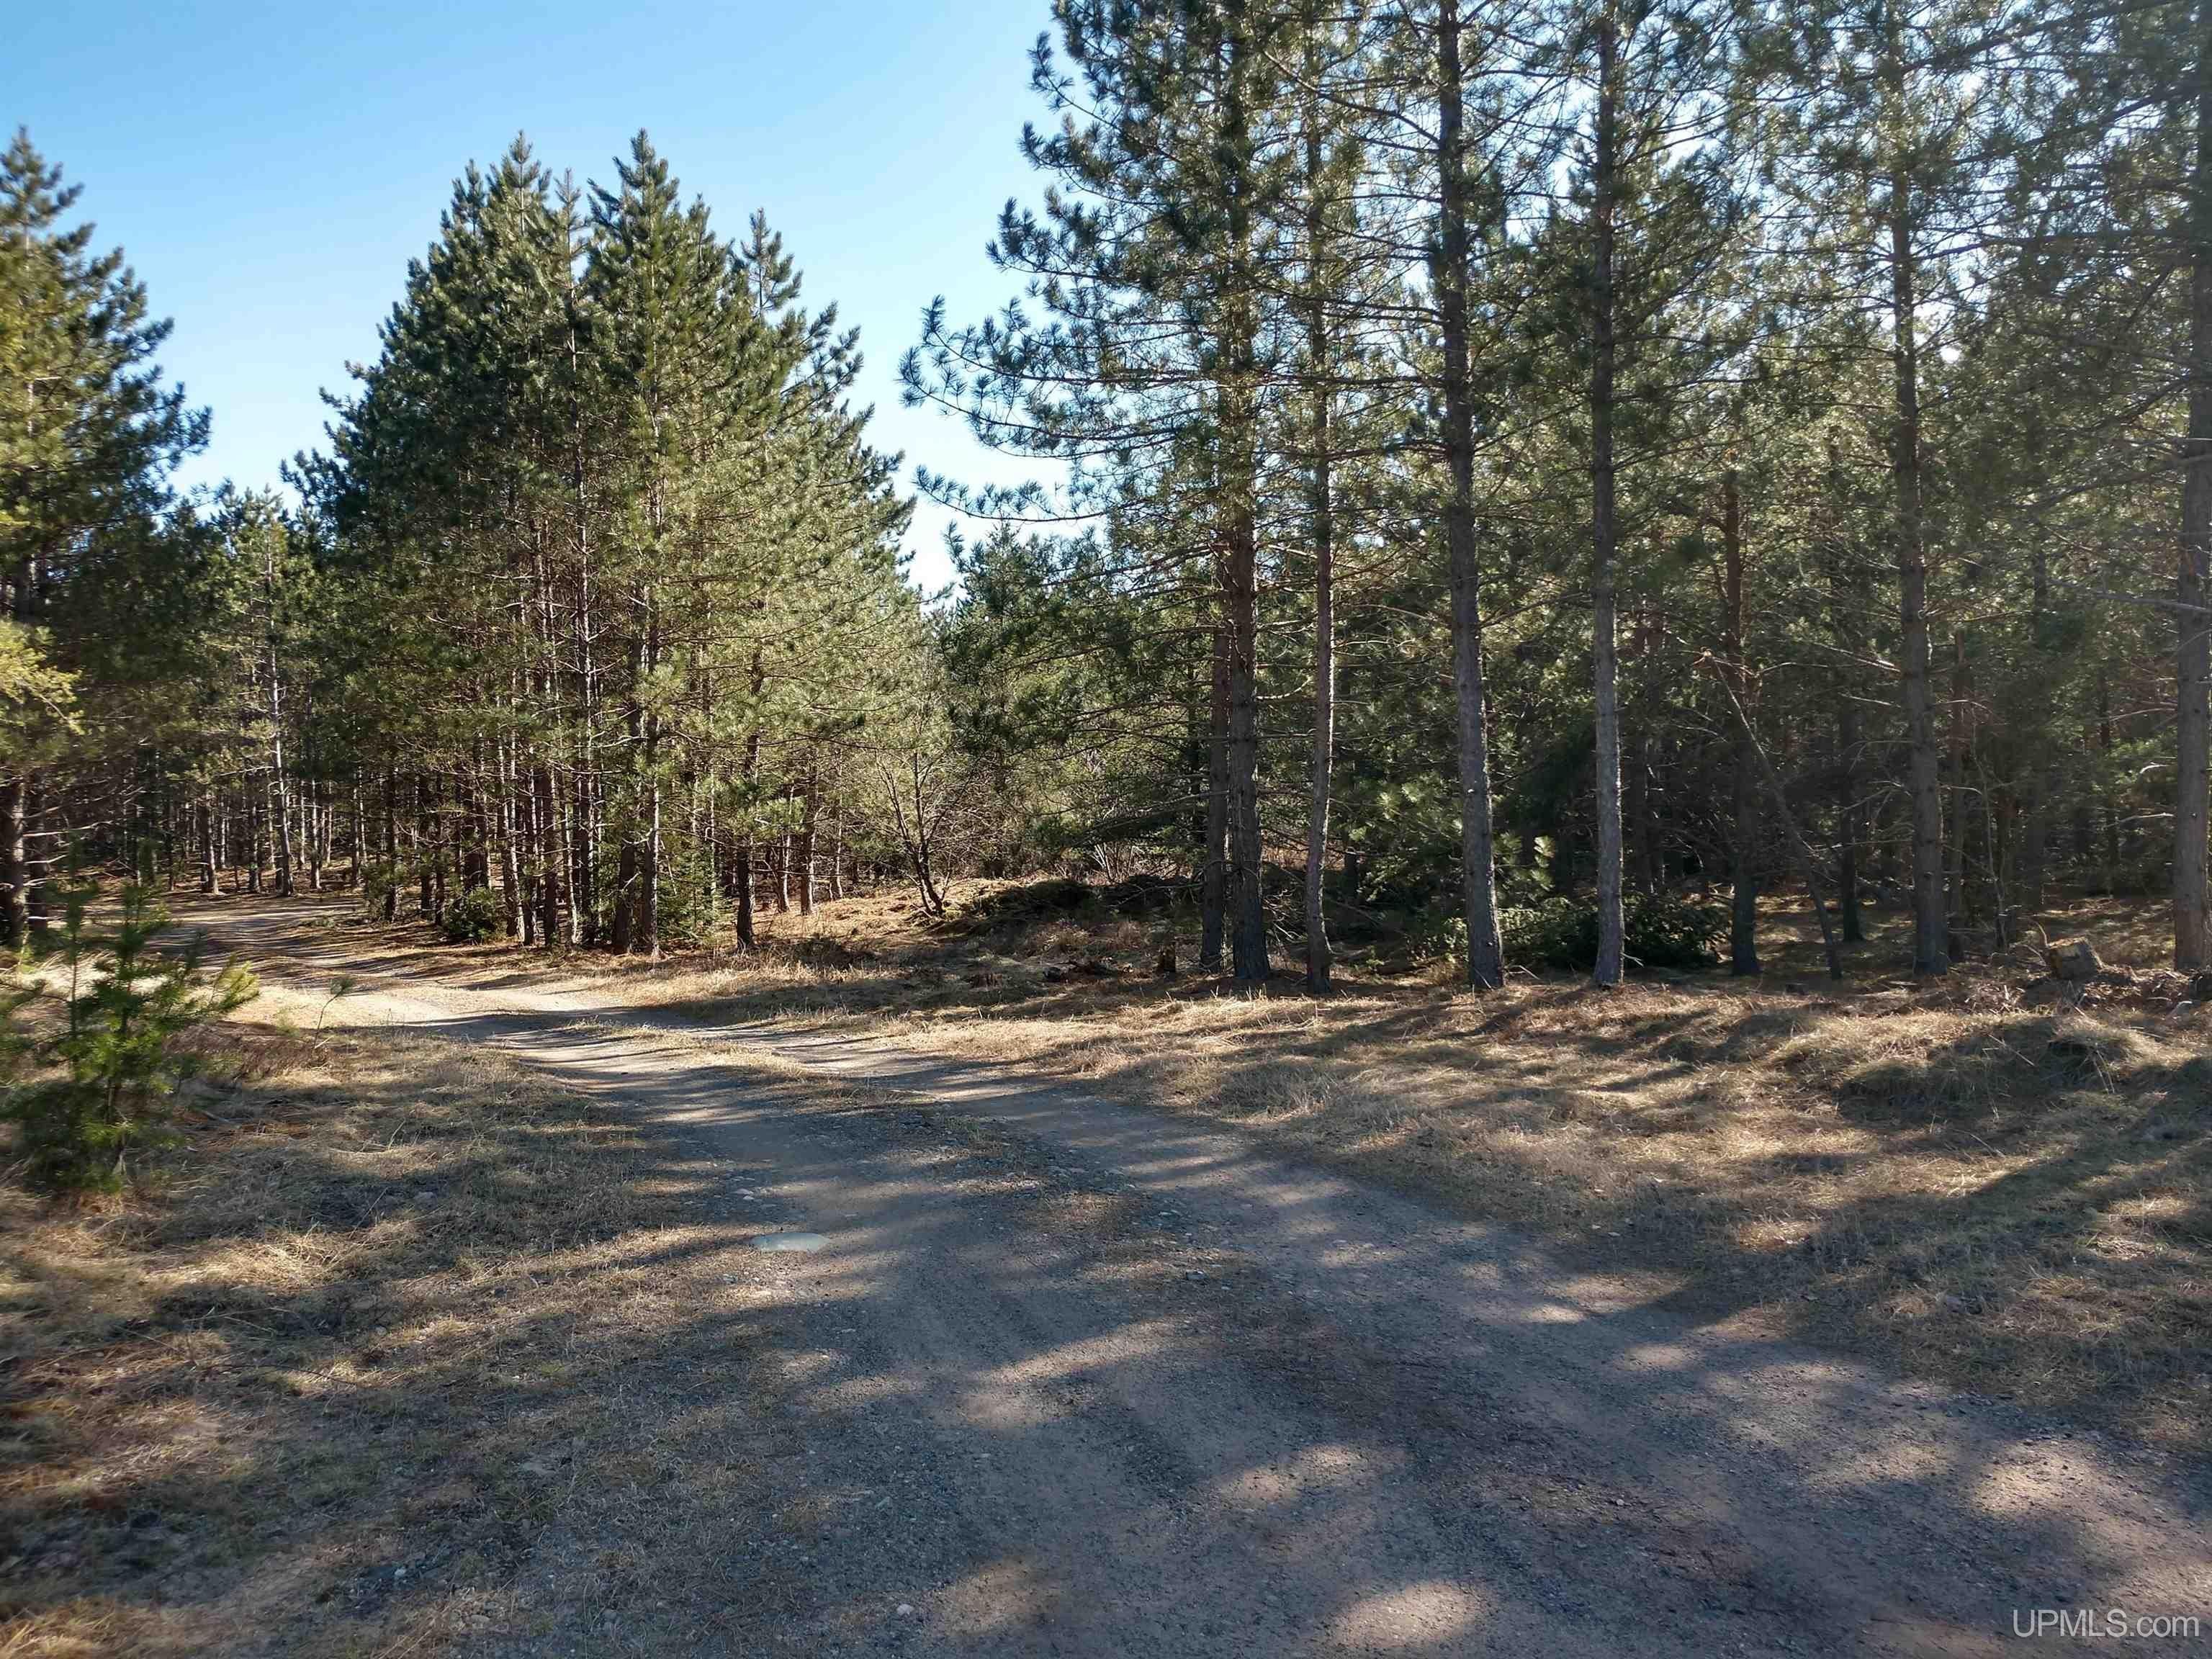 13. 79.7 Acres Co Rd Cco (Red Road)